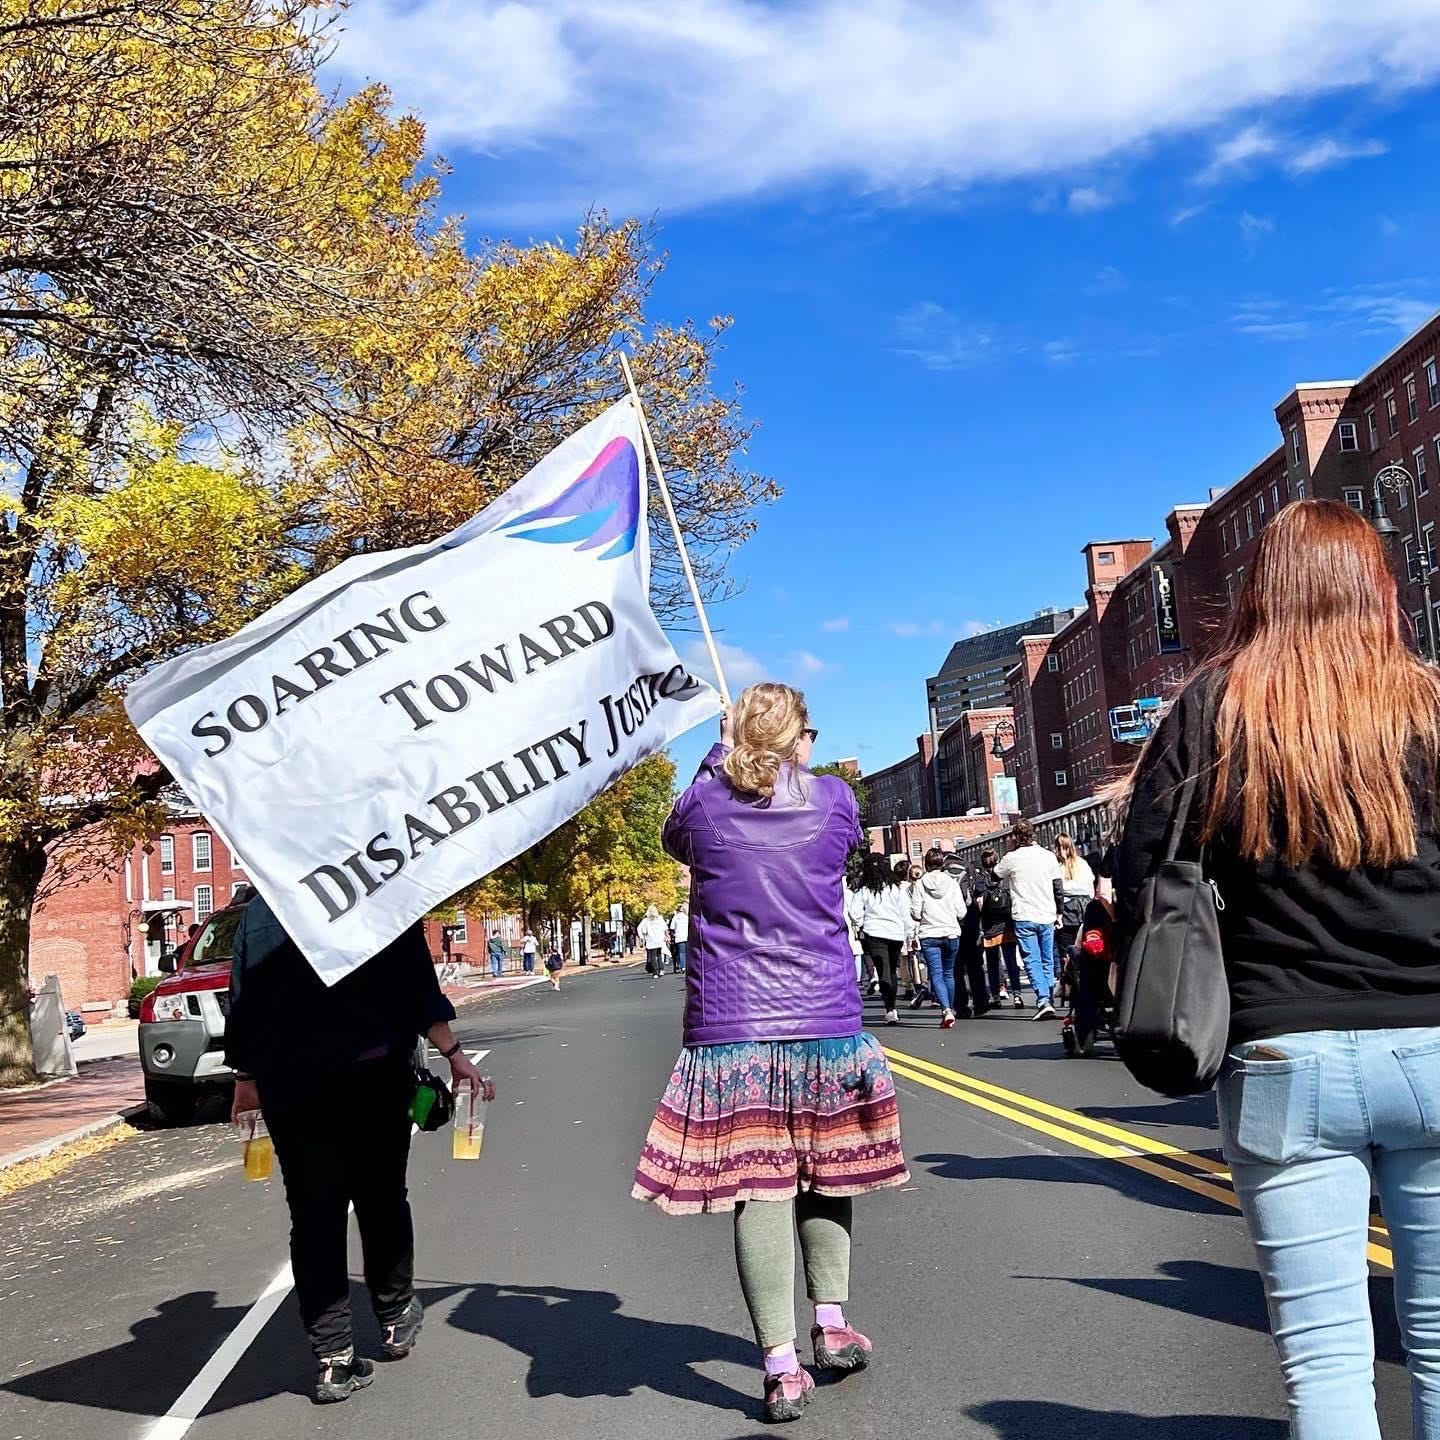 In the middle of a street where a parade is marching, a white woman holds a flag flying behind her that says Soaring Toward Disability Justice.